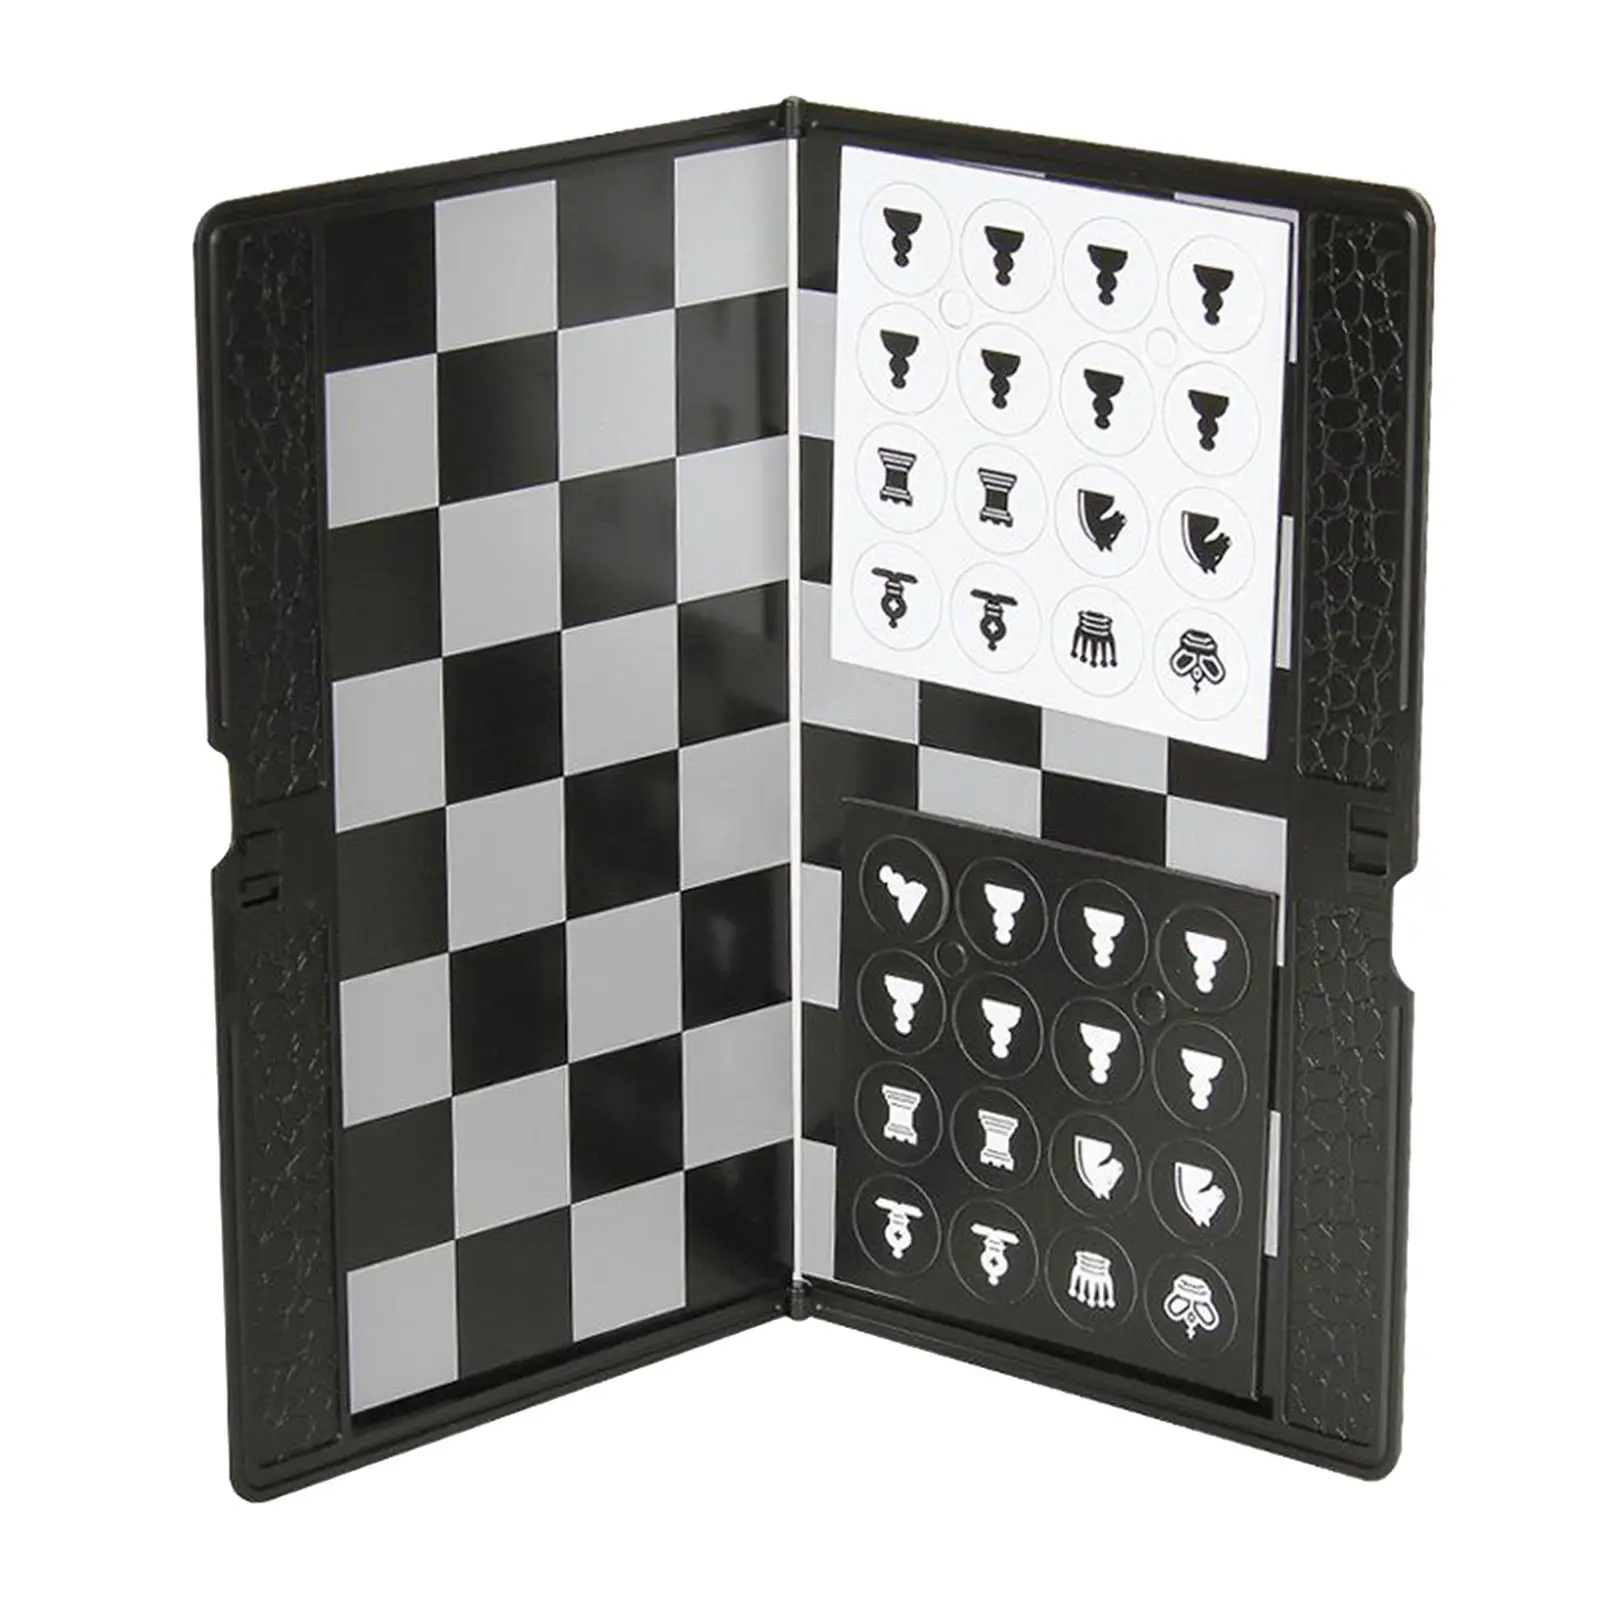 High Quality Chess Game Mini Size Wallet Chess Set Folding Chessboard 32 Chess Pieces Kids Toys Playing Game